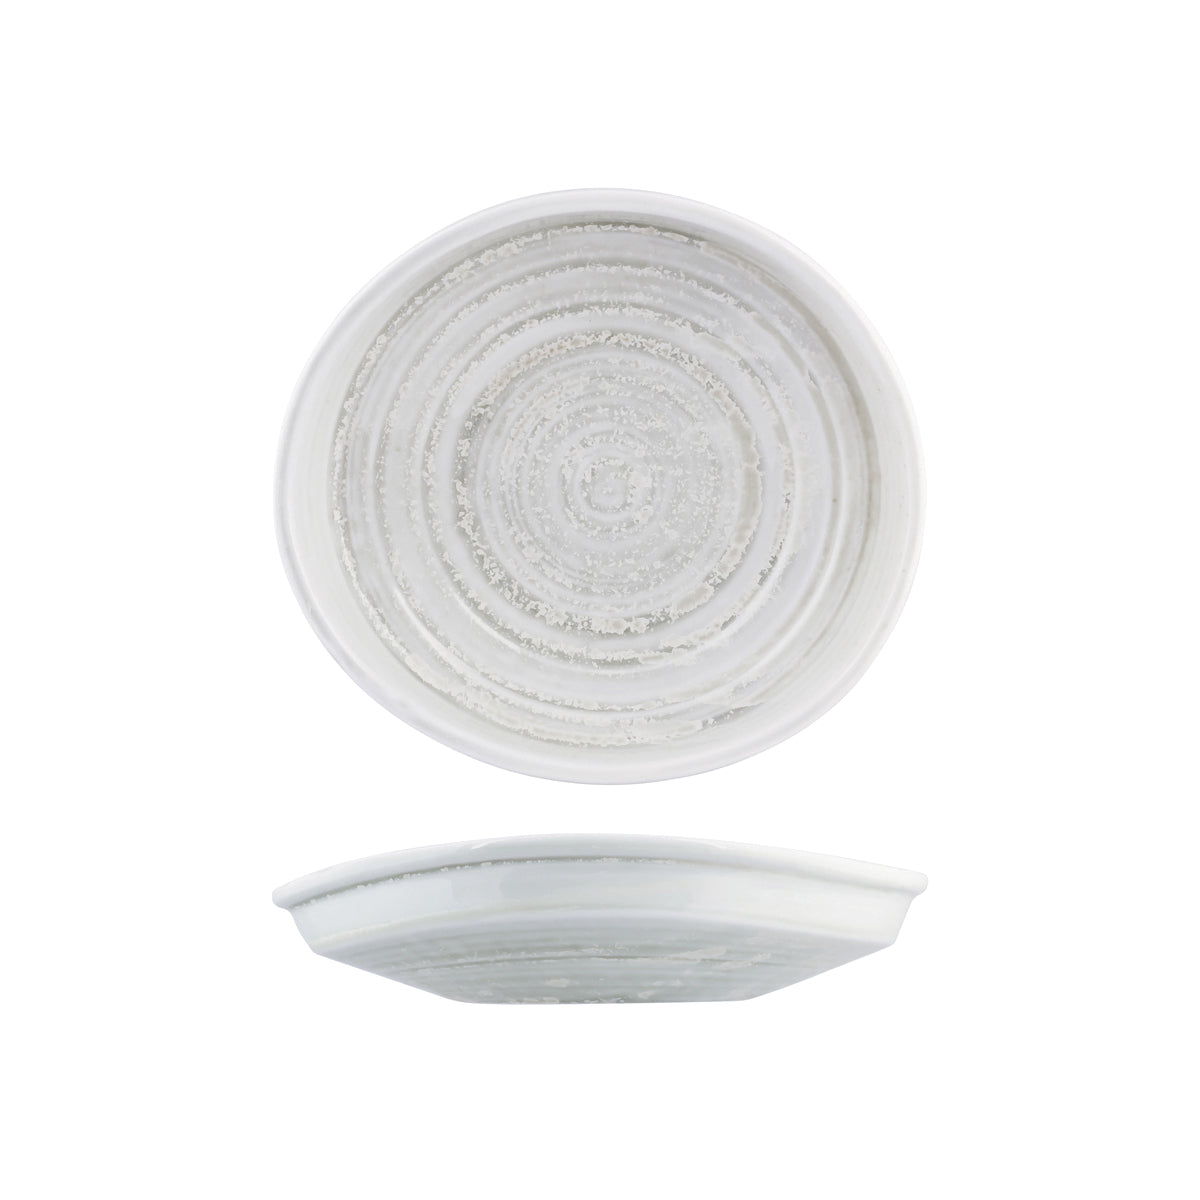 Organic Bowl-Plate - 255x235mm, Willow, Moda Porcelain from Moda Porcelain. made out of Porcelain and sold in boxes of 6. Hospitality quality at wholesale price with The Flying Fork! 